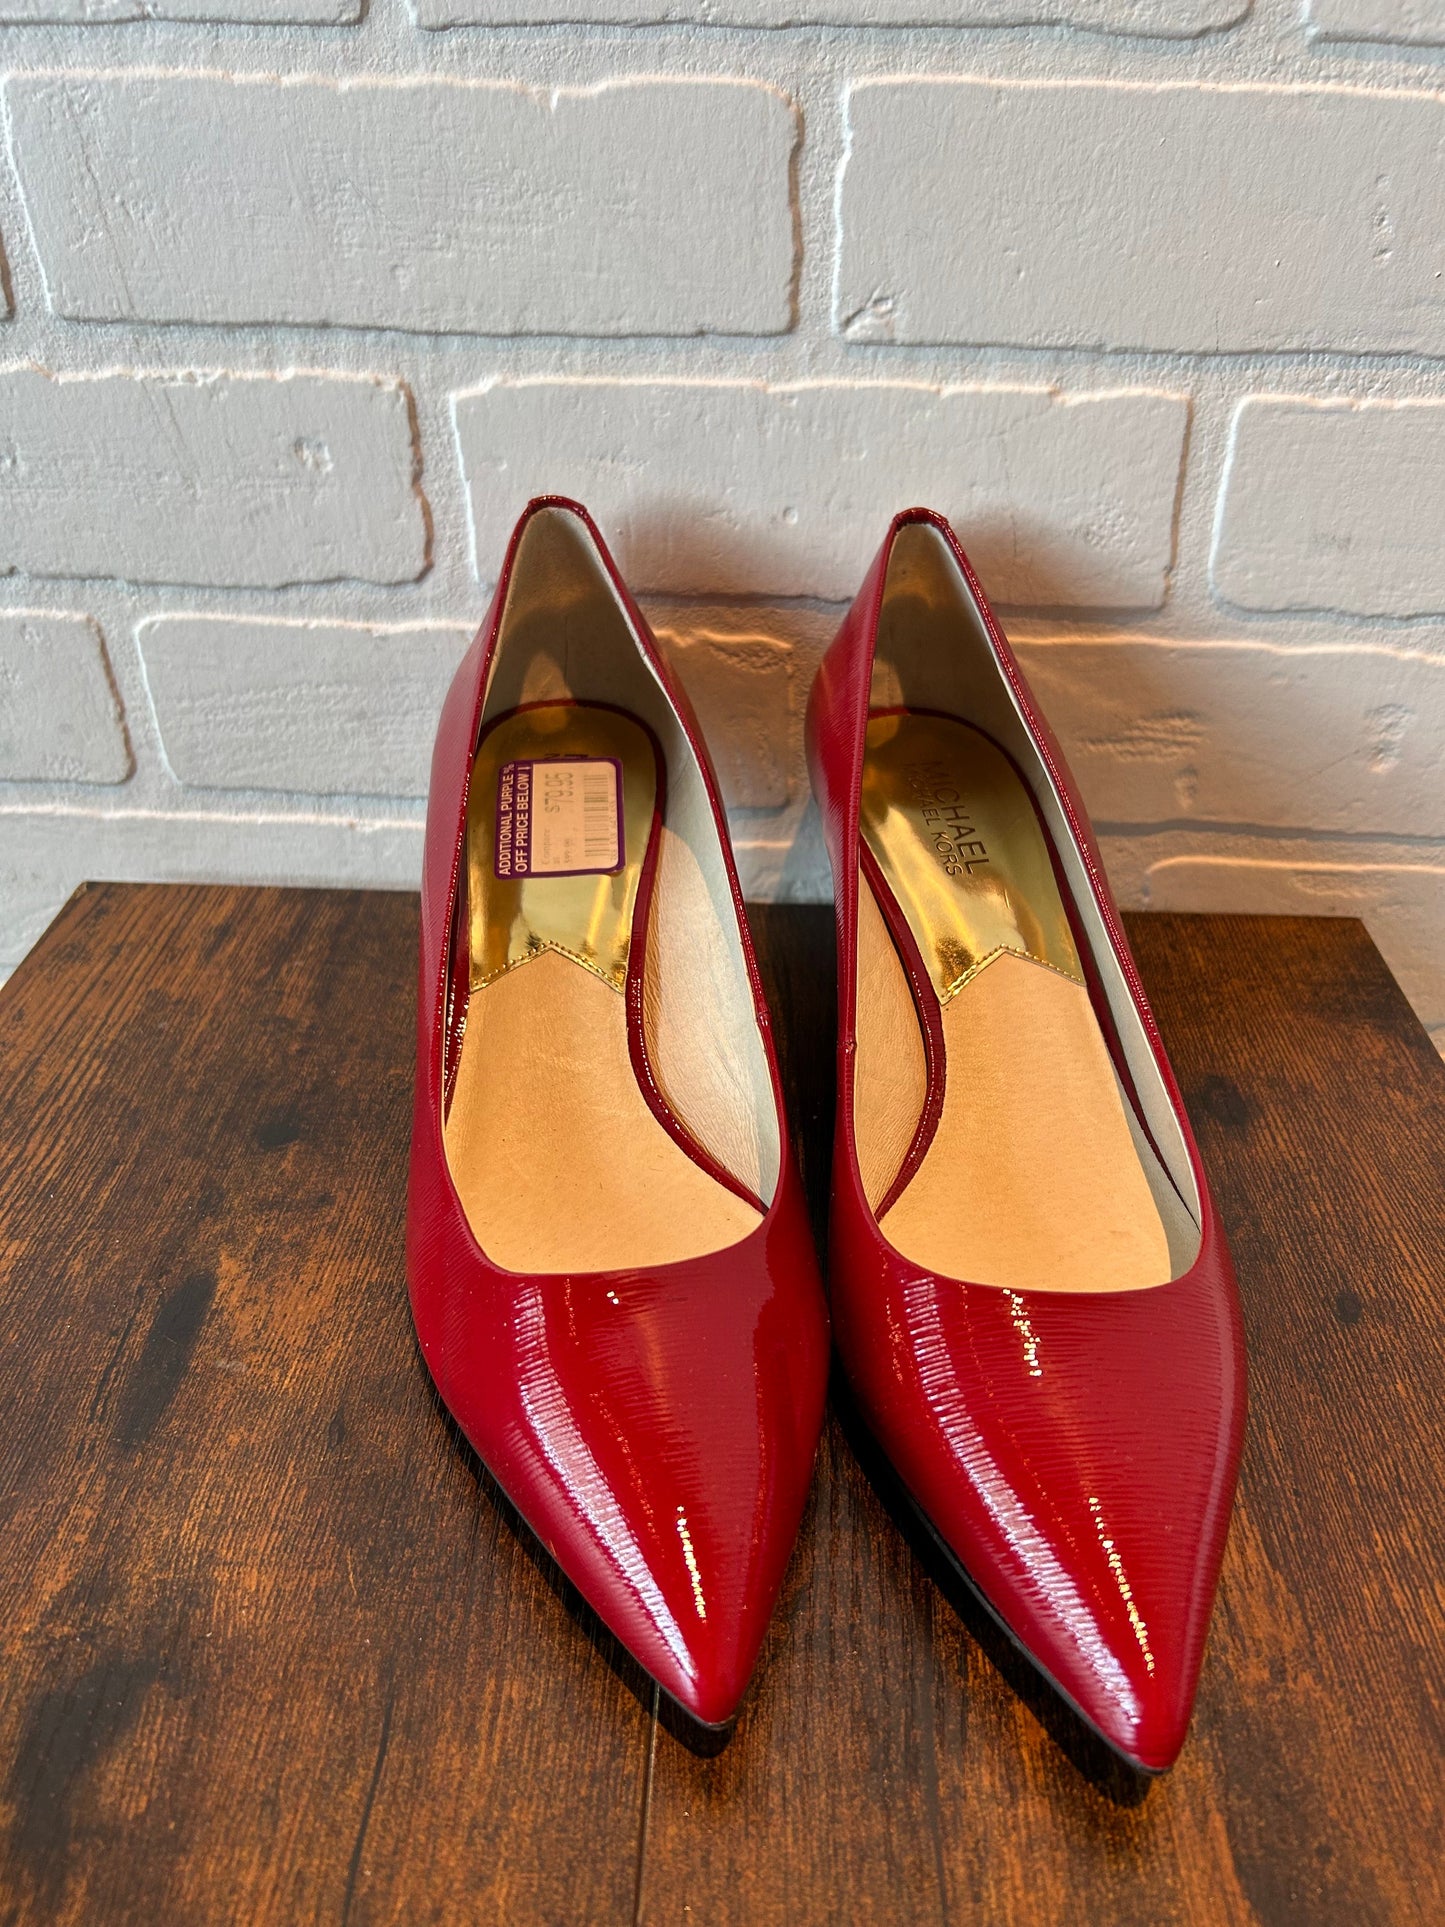 Red Shoes Heels Stiletto Michael By Michael Kors, Size 9.5